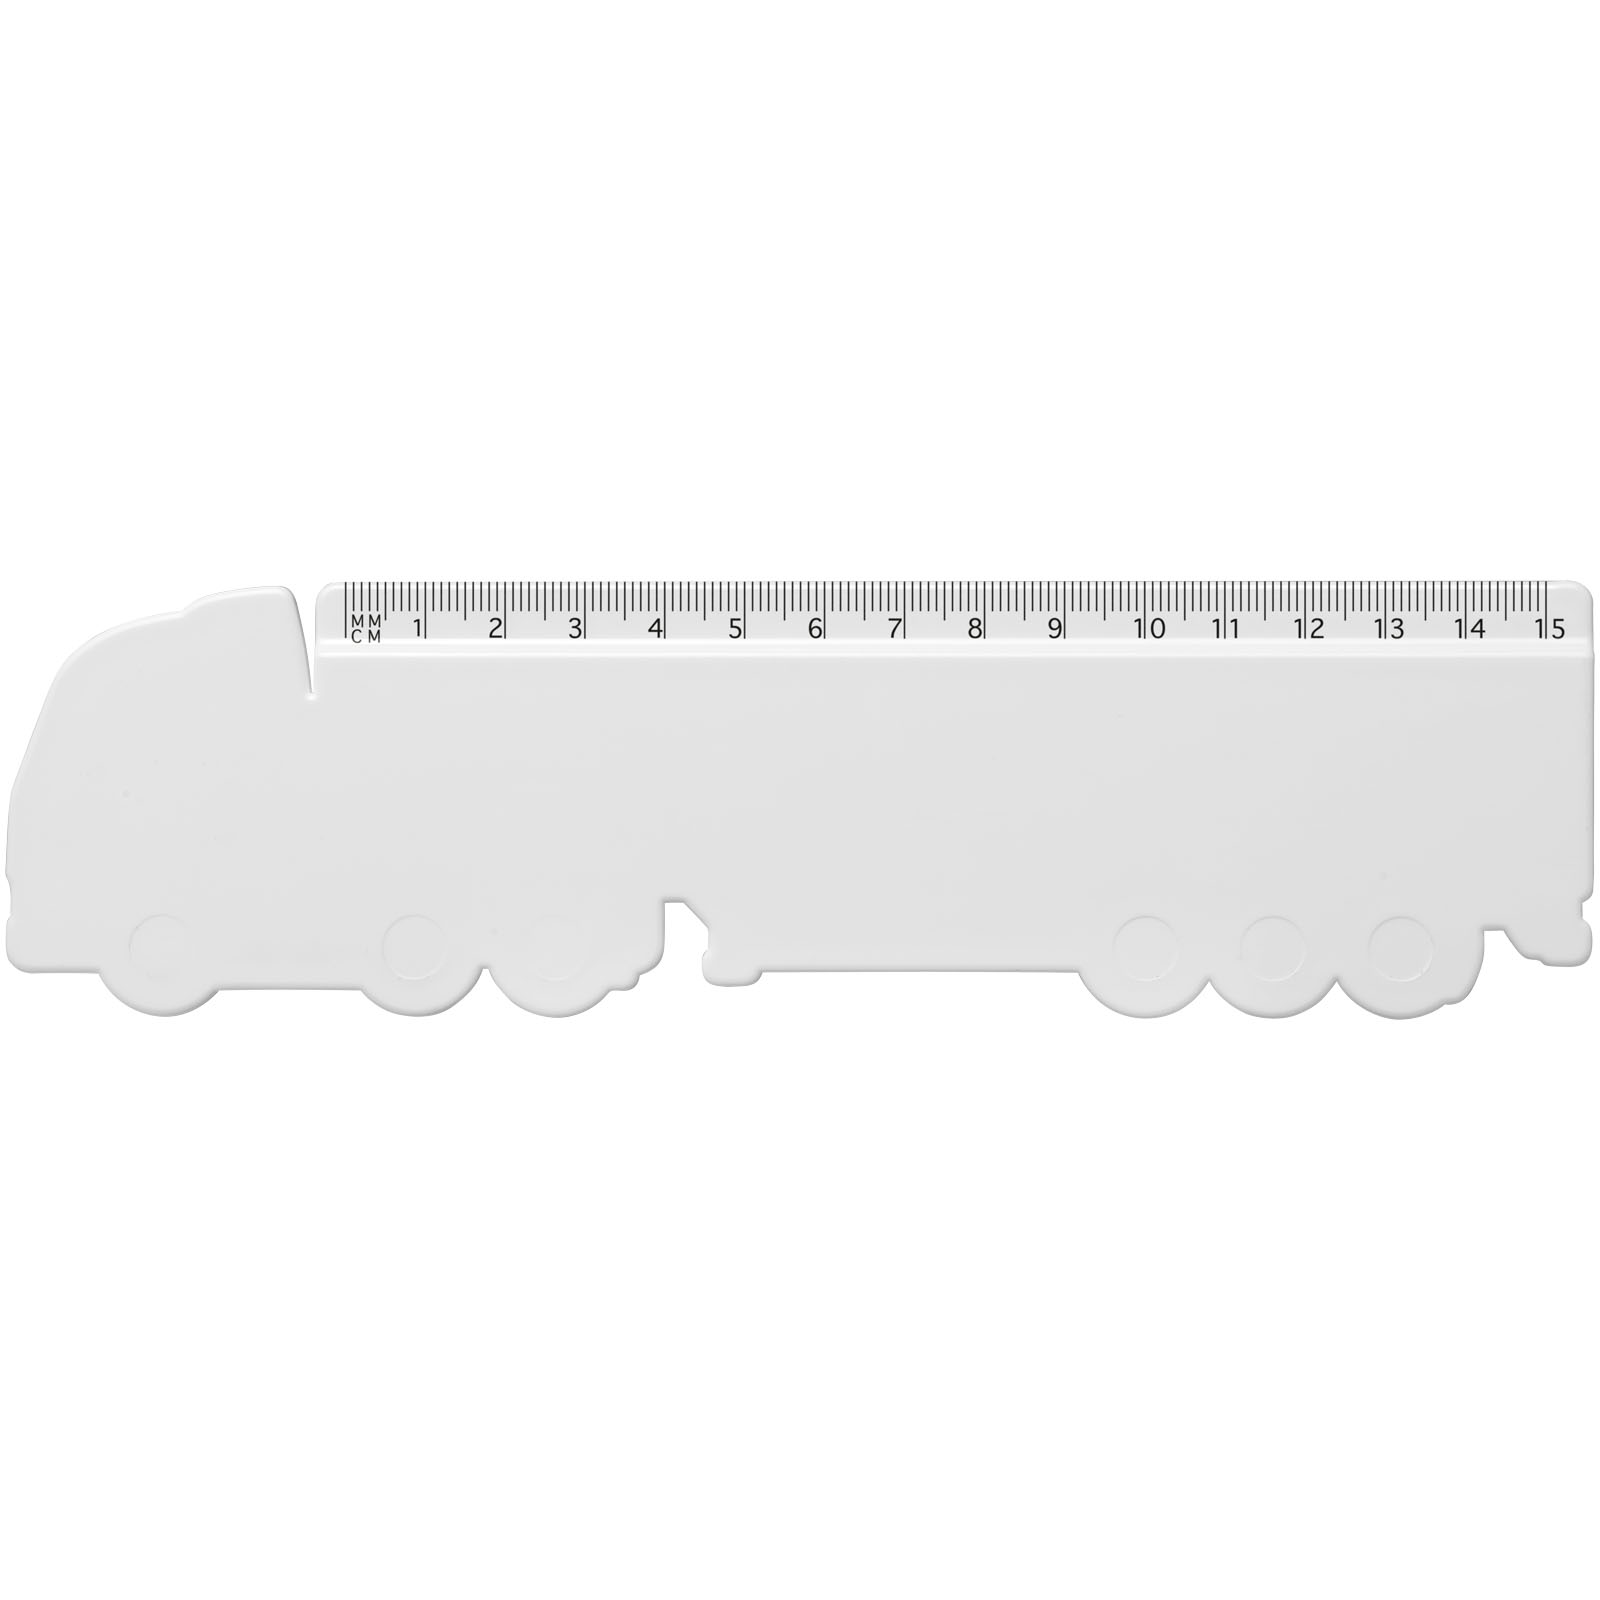 Advertising Desk Accessories - Tait 15 cm lorry-shaped recycled plastic ruler - 1